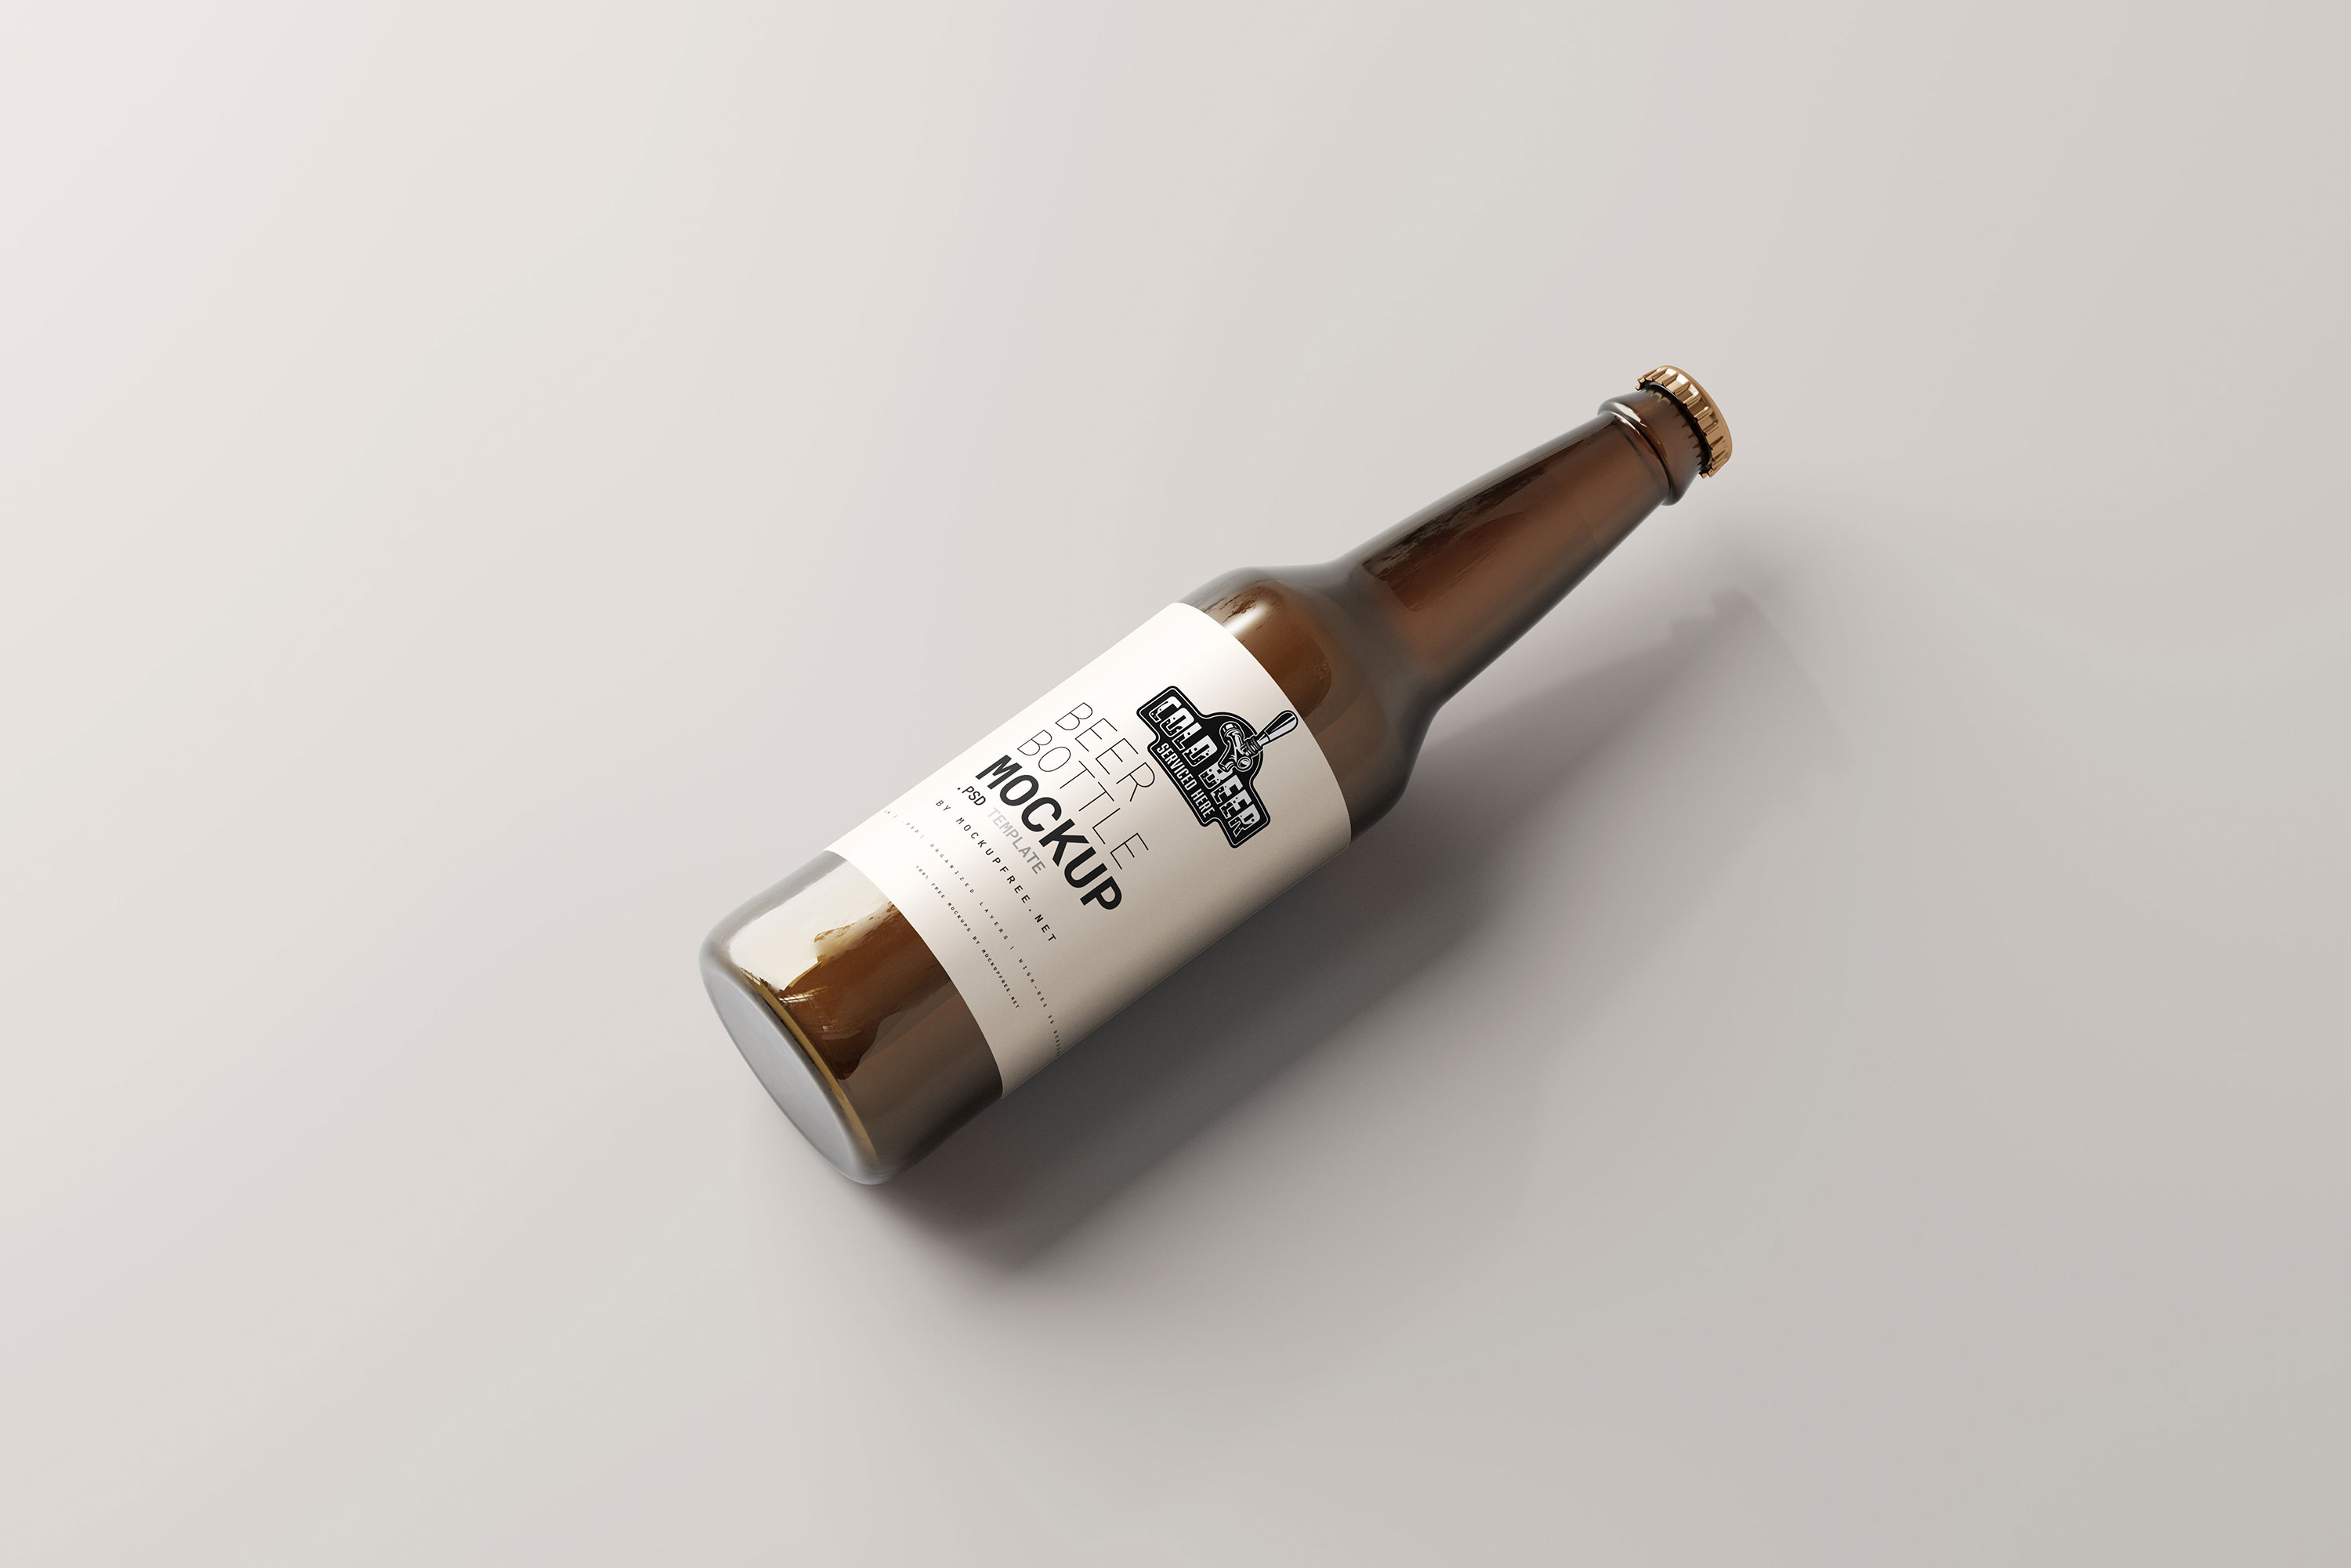 5 Angles of Amber Beer Bottle Mockup FREE PSD